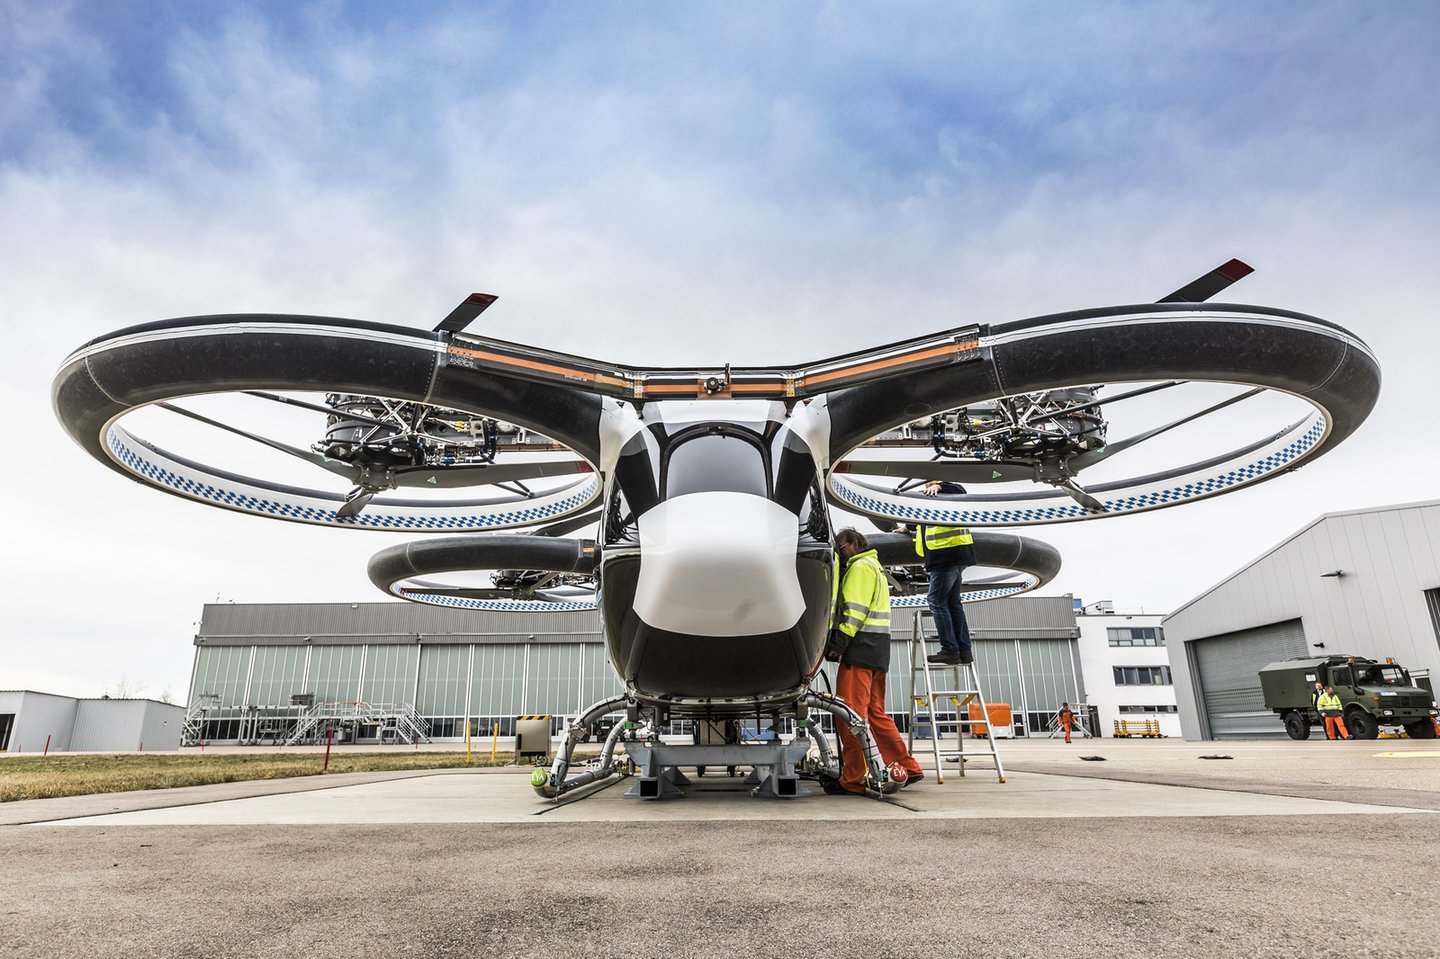 The commercial aerospace sector is leading the urban air mobility revolution